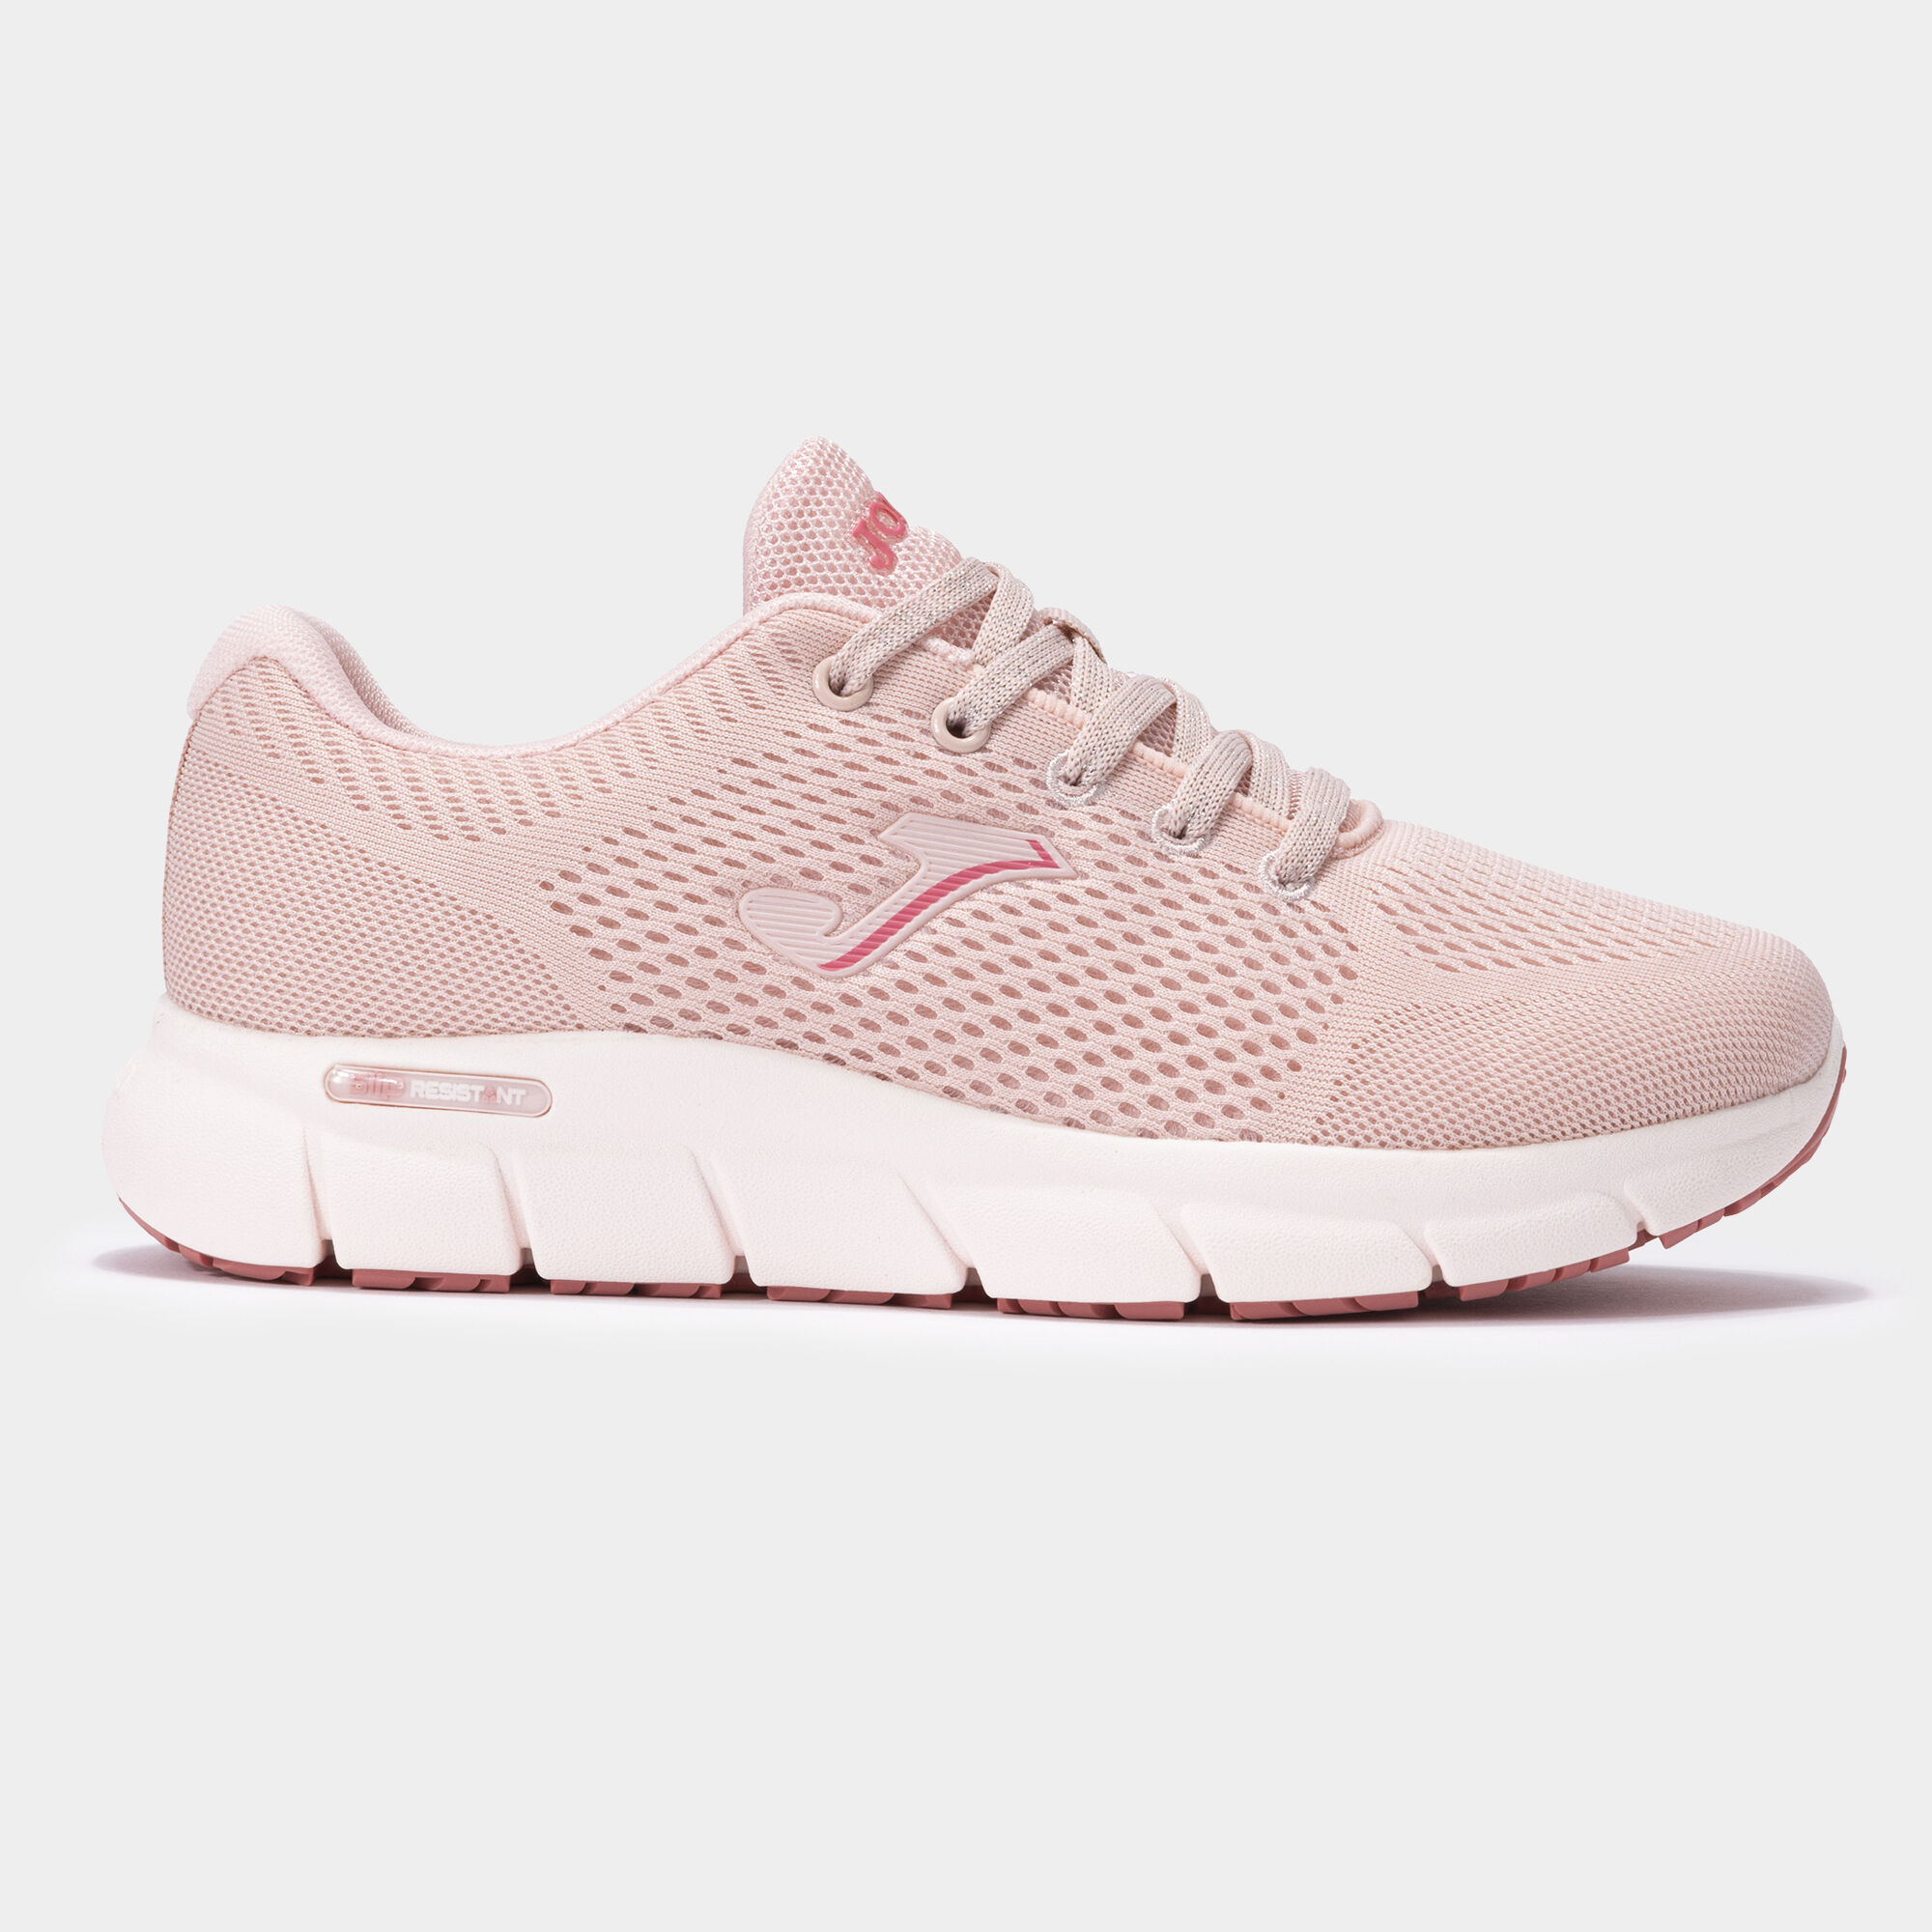 Sapatilhas casual Zen Lady 24 mulher rosa claro